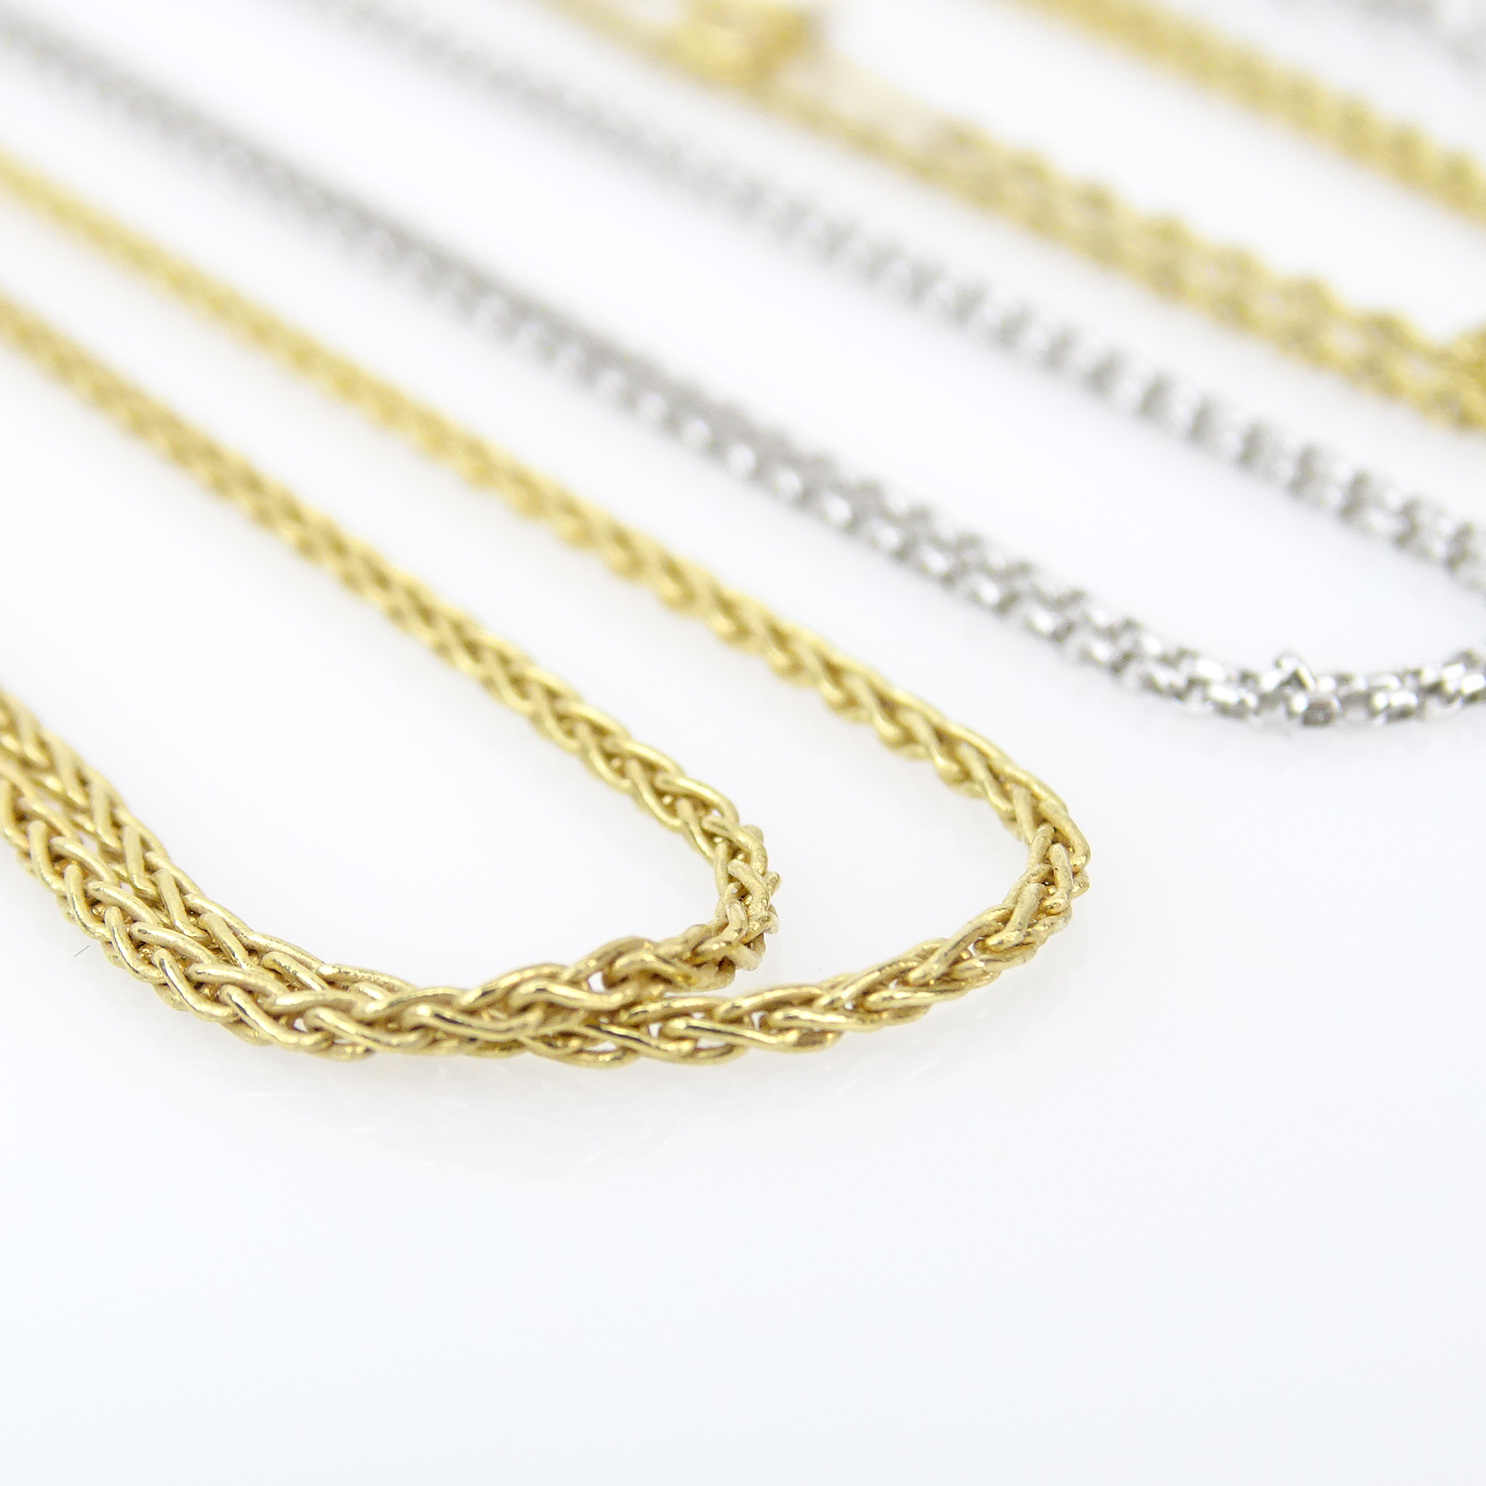 Four (4) 14 Karat Gold Chains Including Two (2) White Gold and Two (2) Yellow Gold